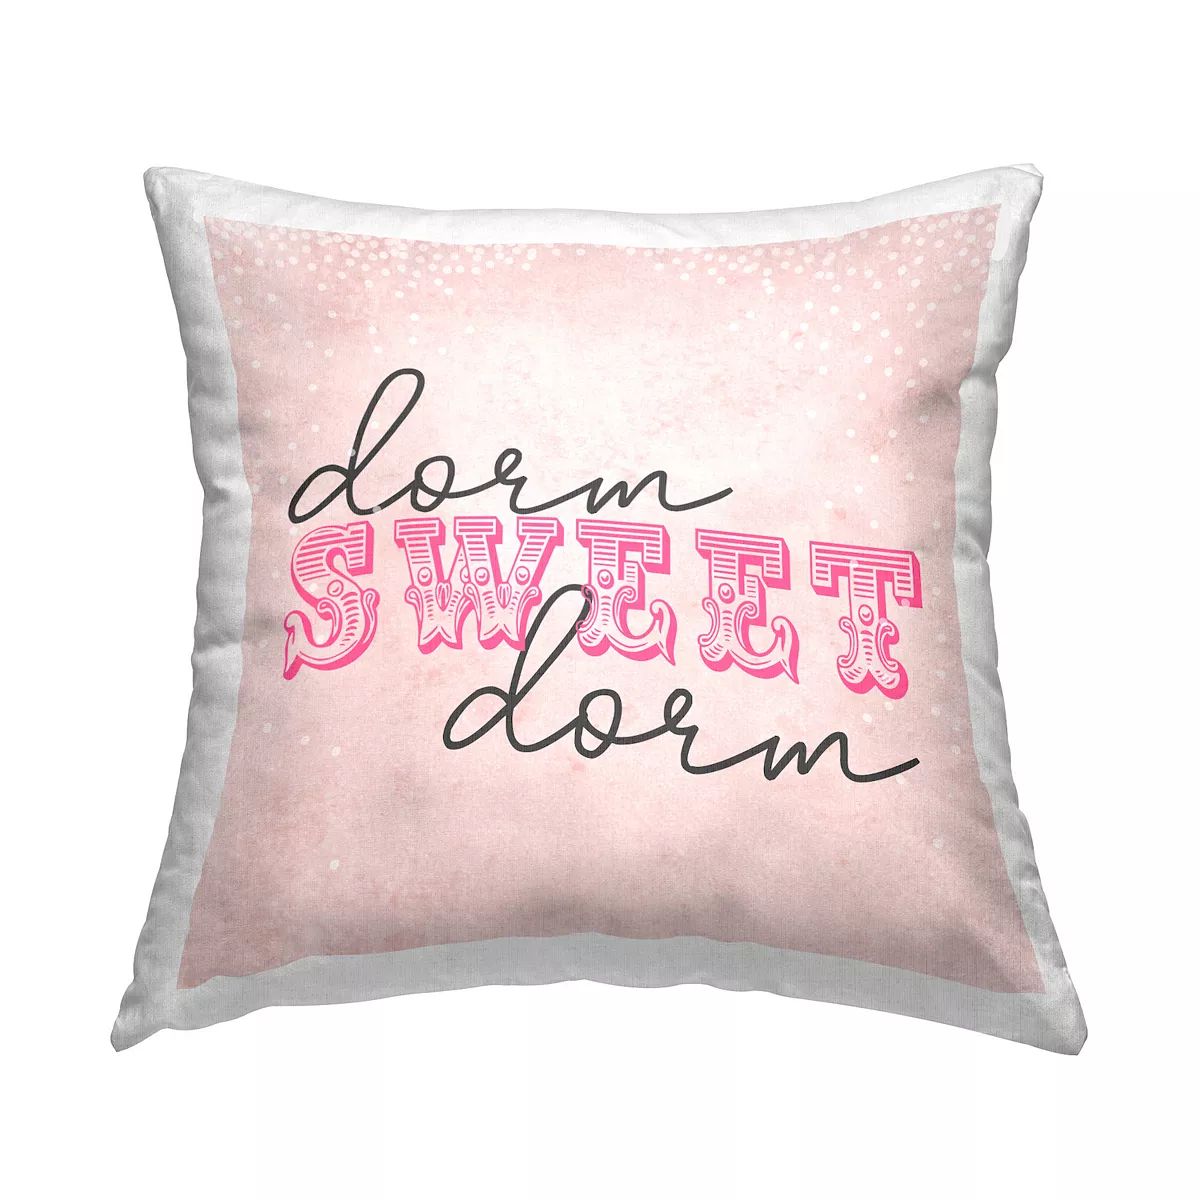 Stupell Home Decor "Dorm Sweet Dorm" Pink College Fancy Typography Throw Pillow | Kohl's